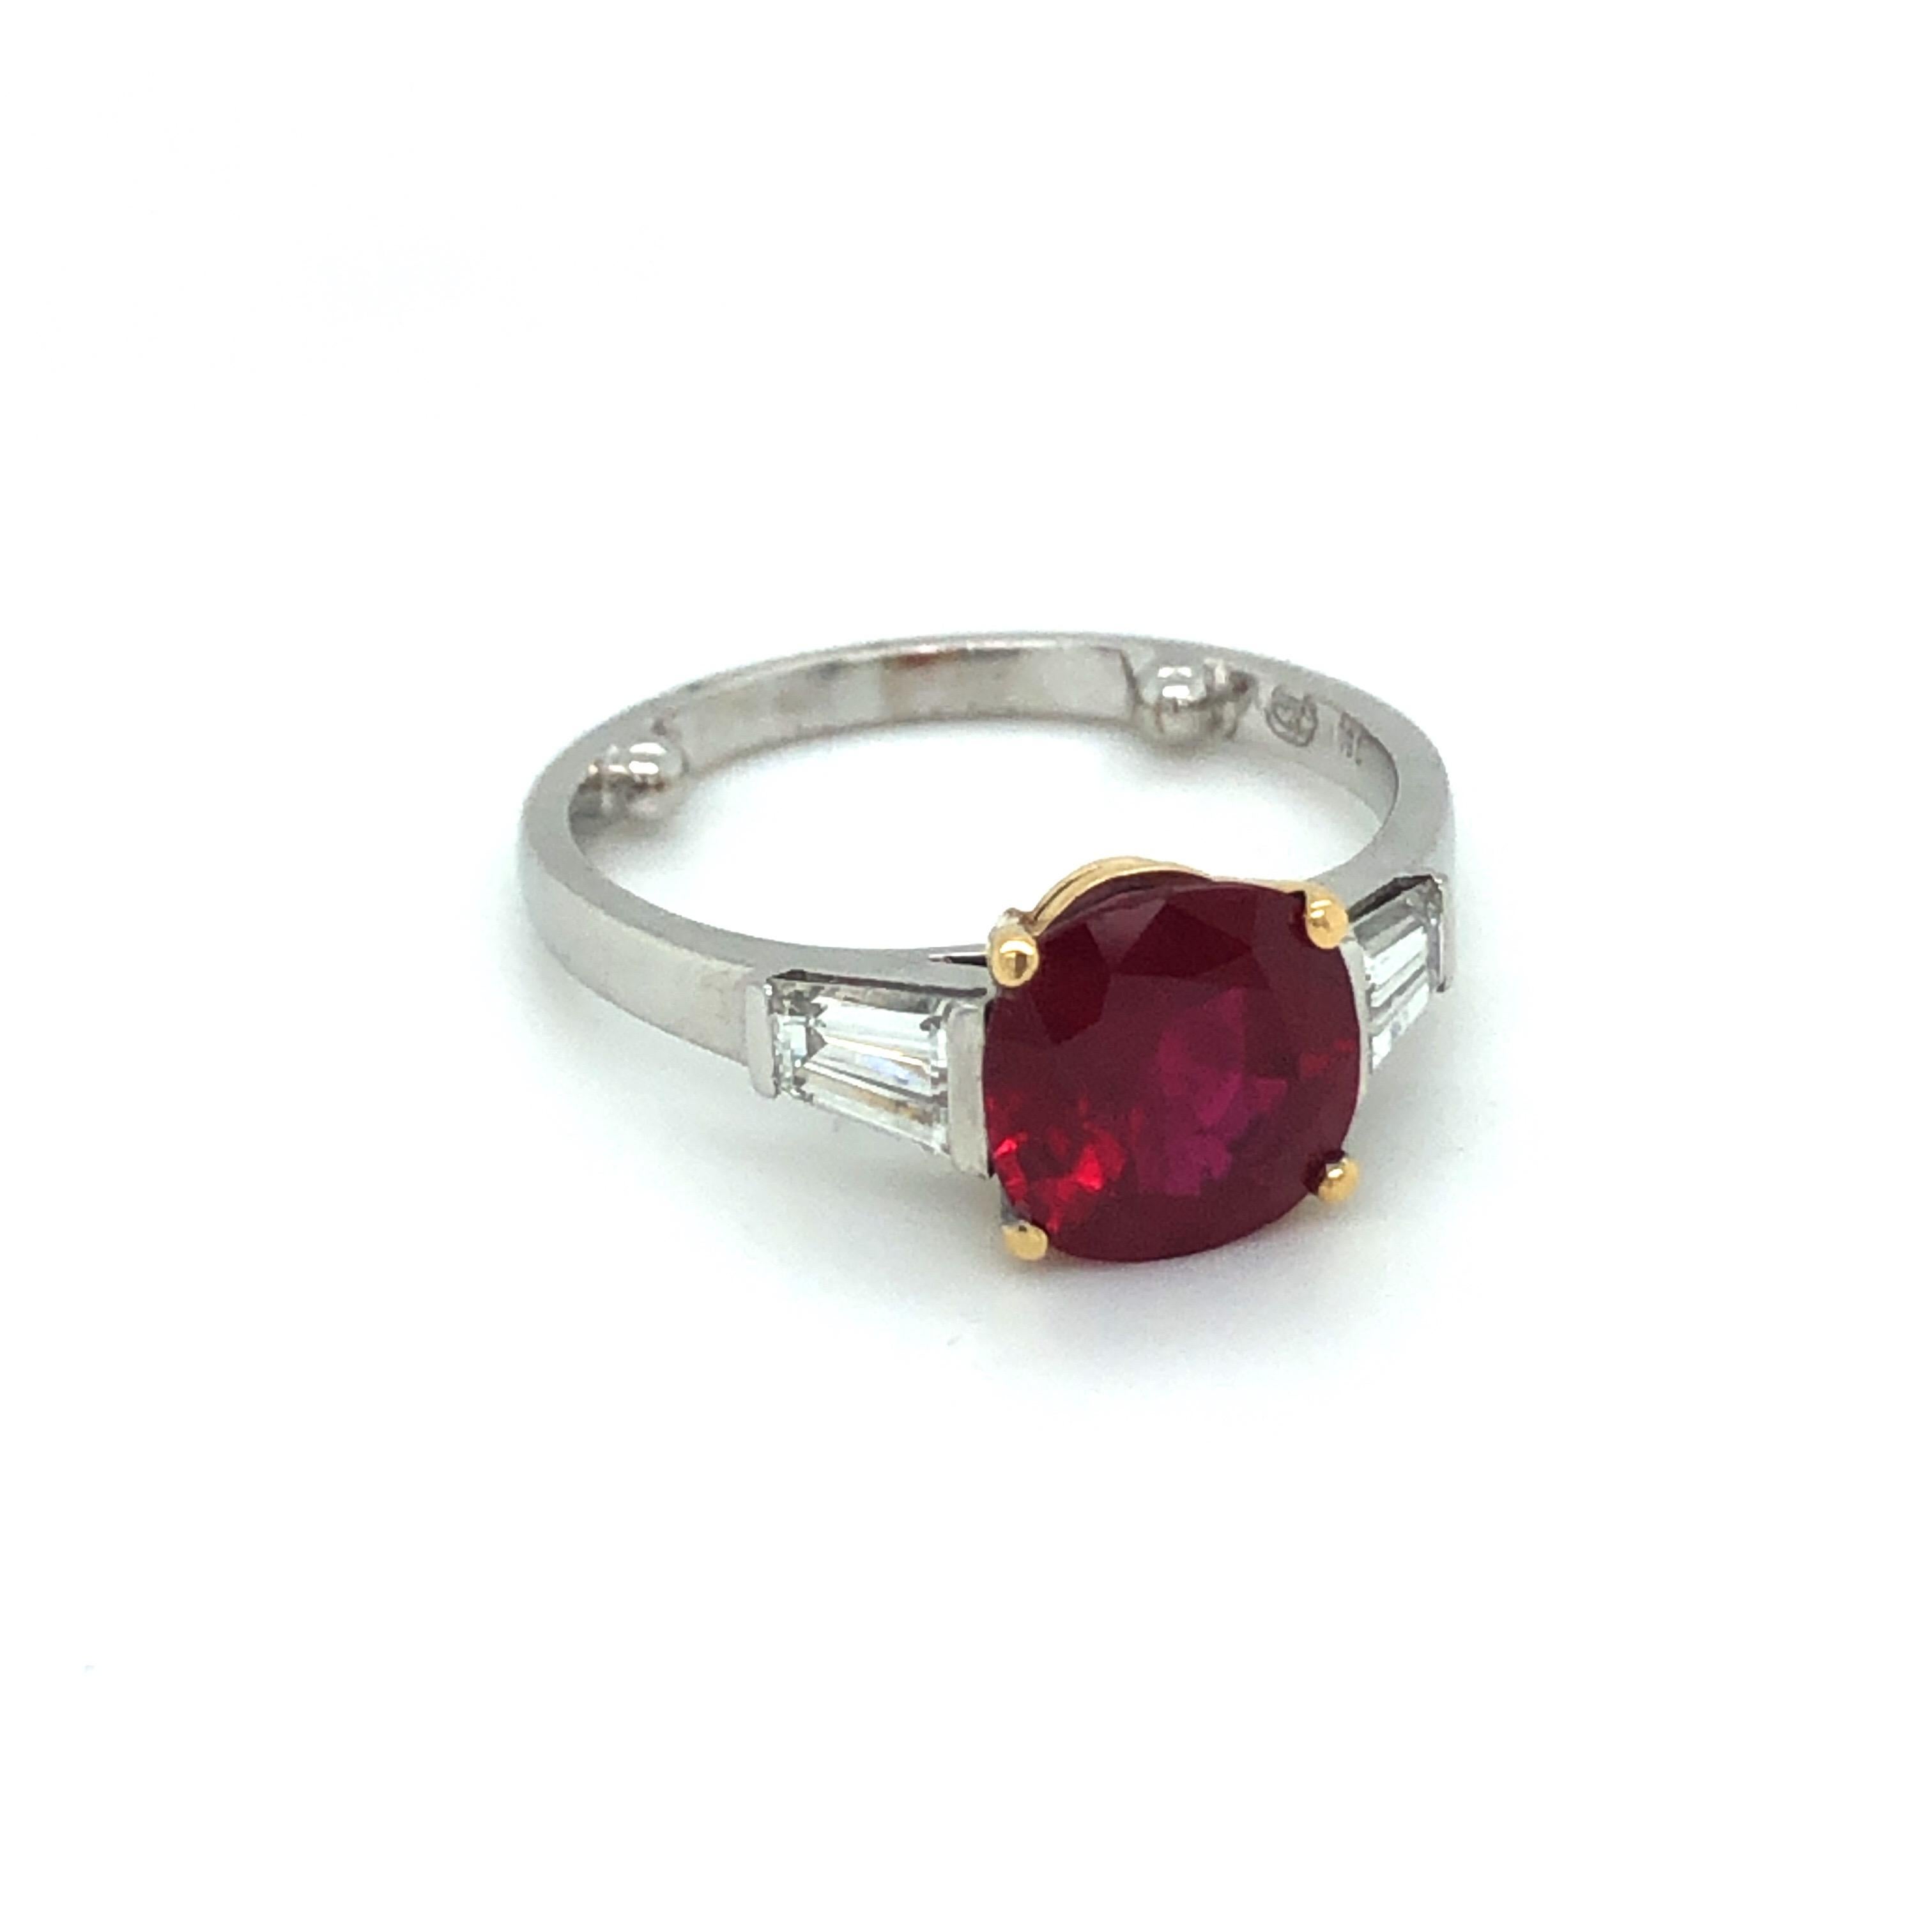 Classic 18 karat white gold ruby three stone ring by renowned Swiss jeweler Gubelin.
This beautiful ring is set with a fiery cushion-shaped 2.9 carats Thai ruby of impeccable quality flanked by two tapered diamonds totalling 0.64 carats. The mount